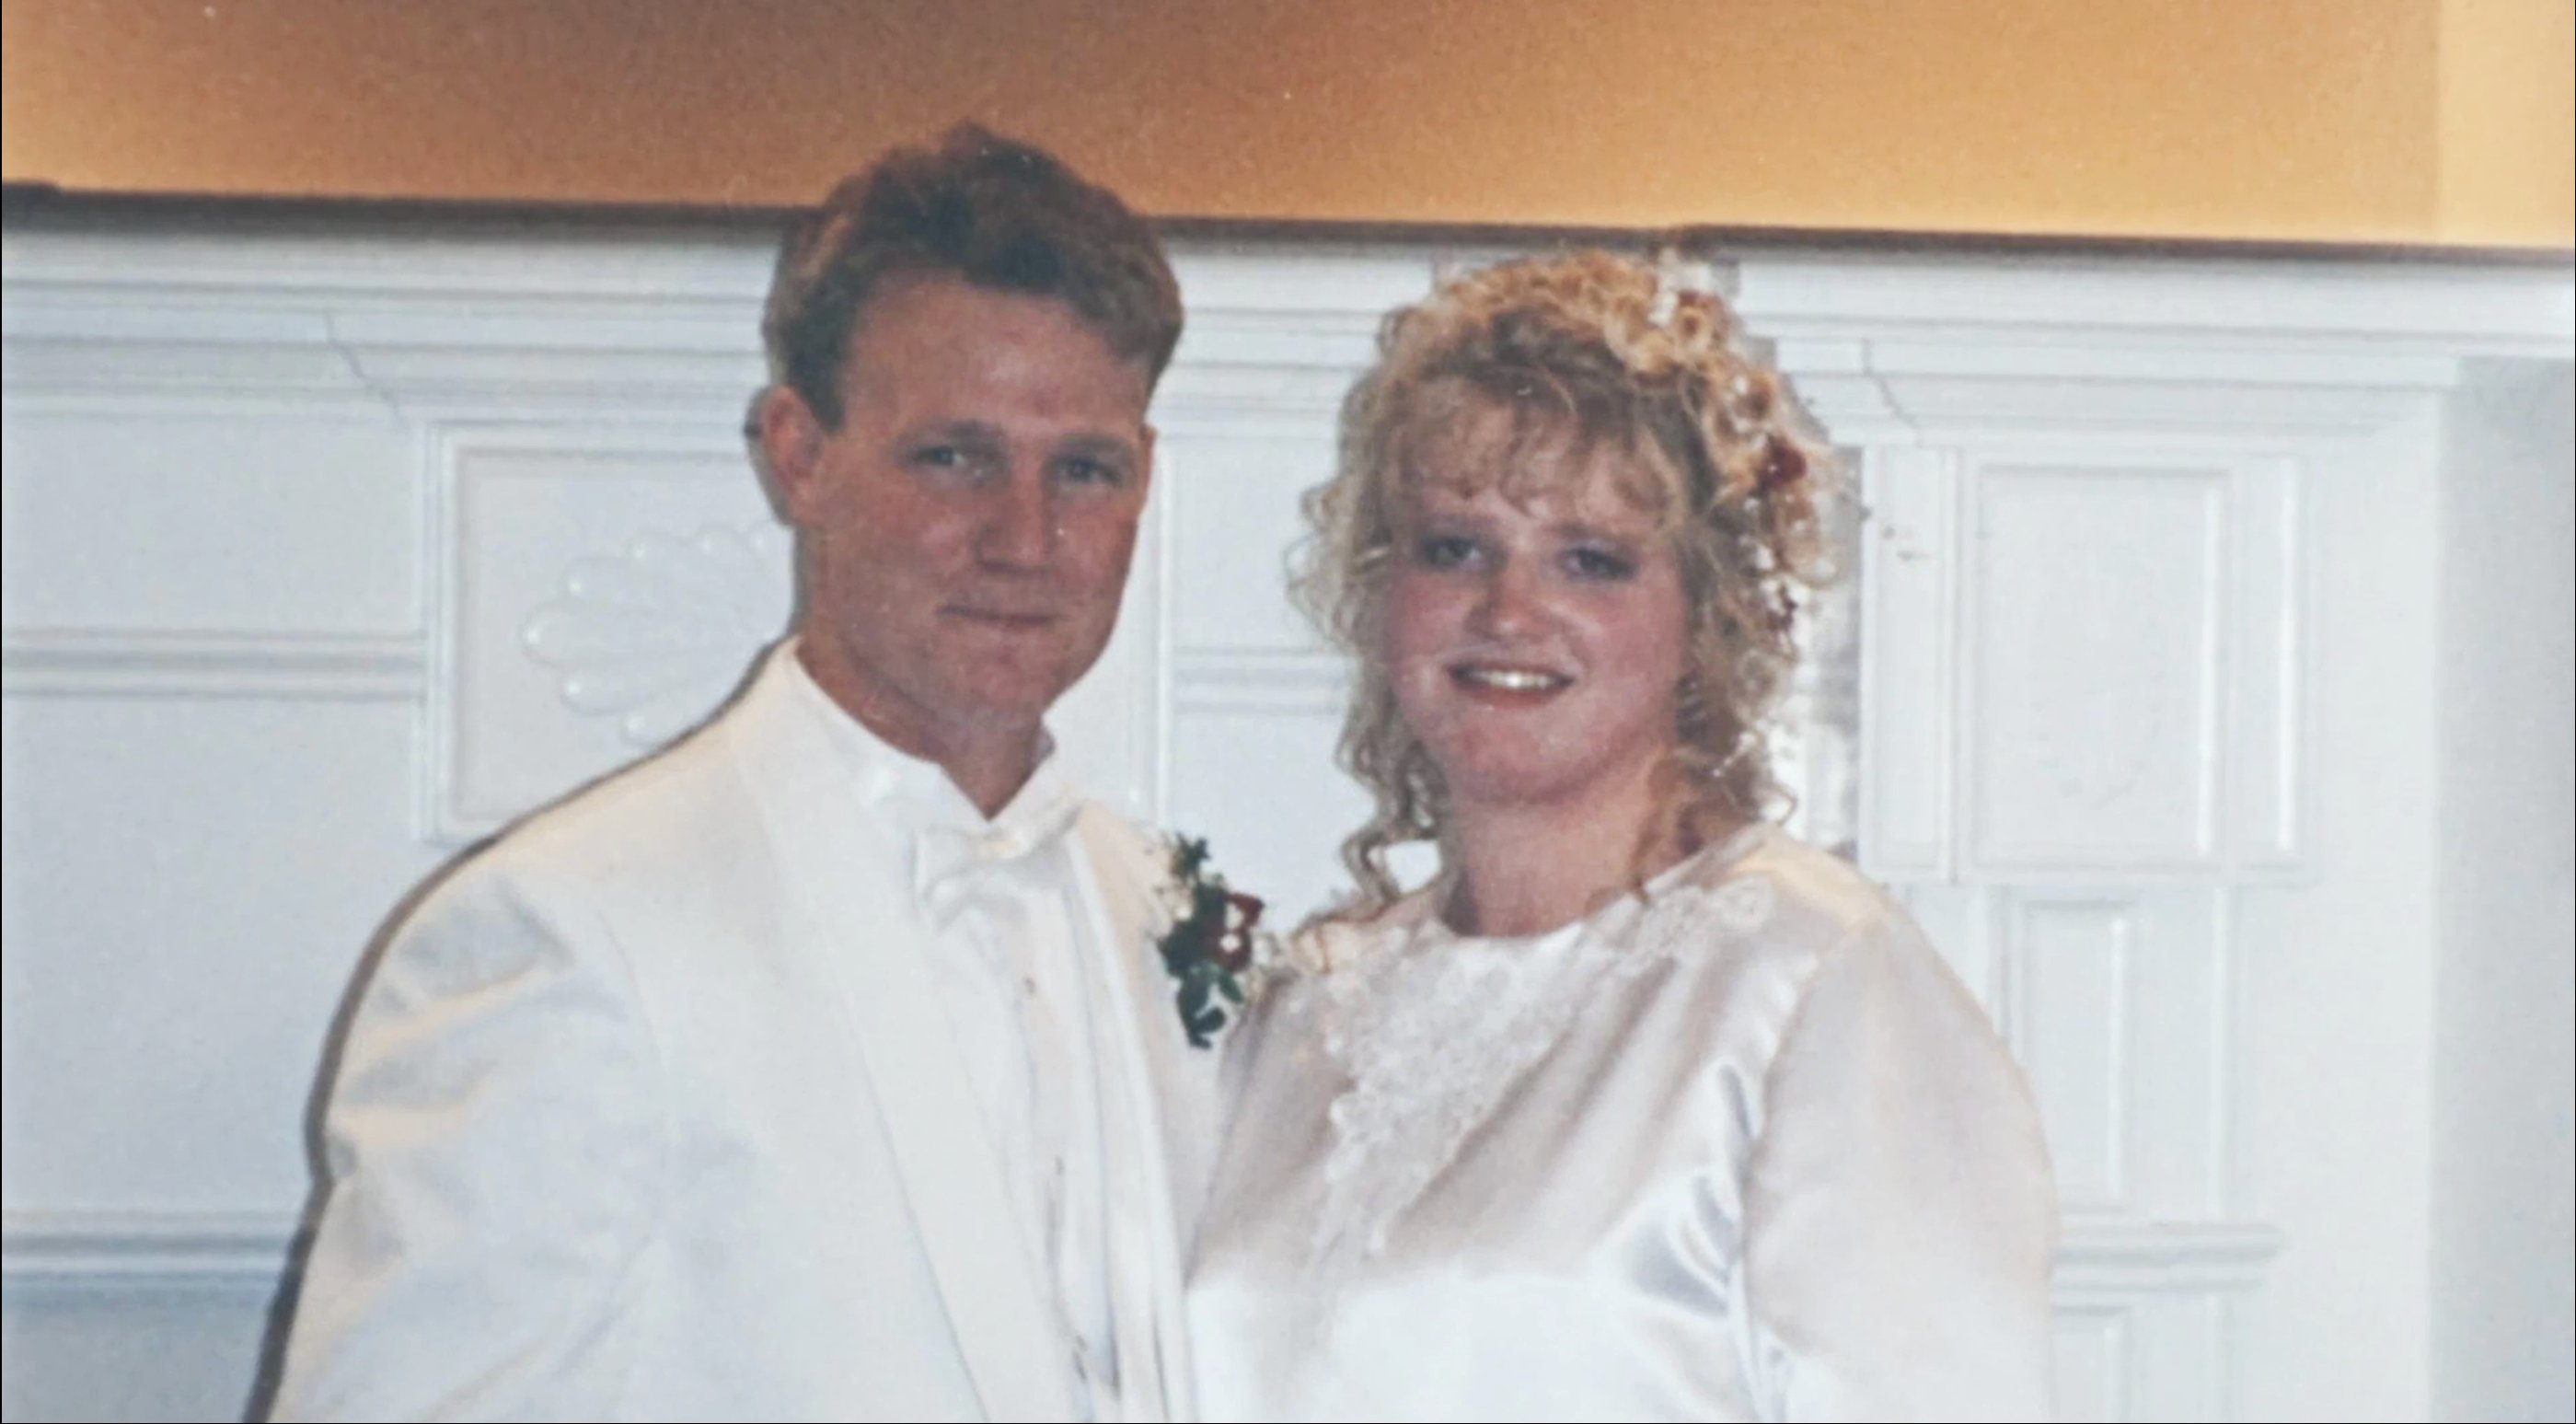 'Sister Wives' stars, Kody Brown wearing a tux and Christine Brown wearing a wedding dress on their wedding day.